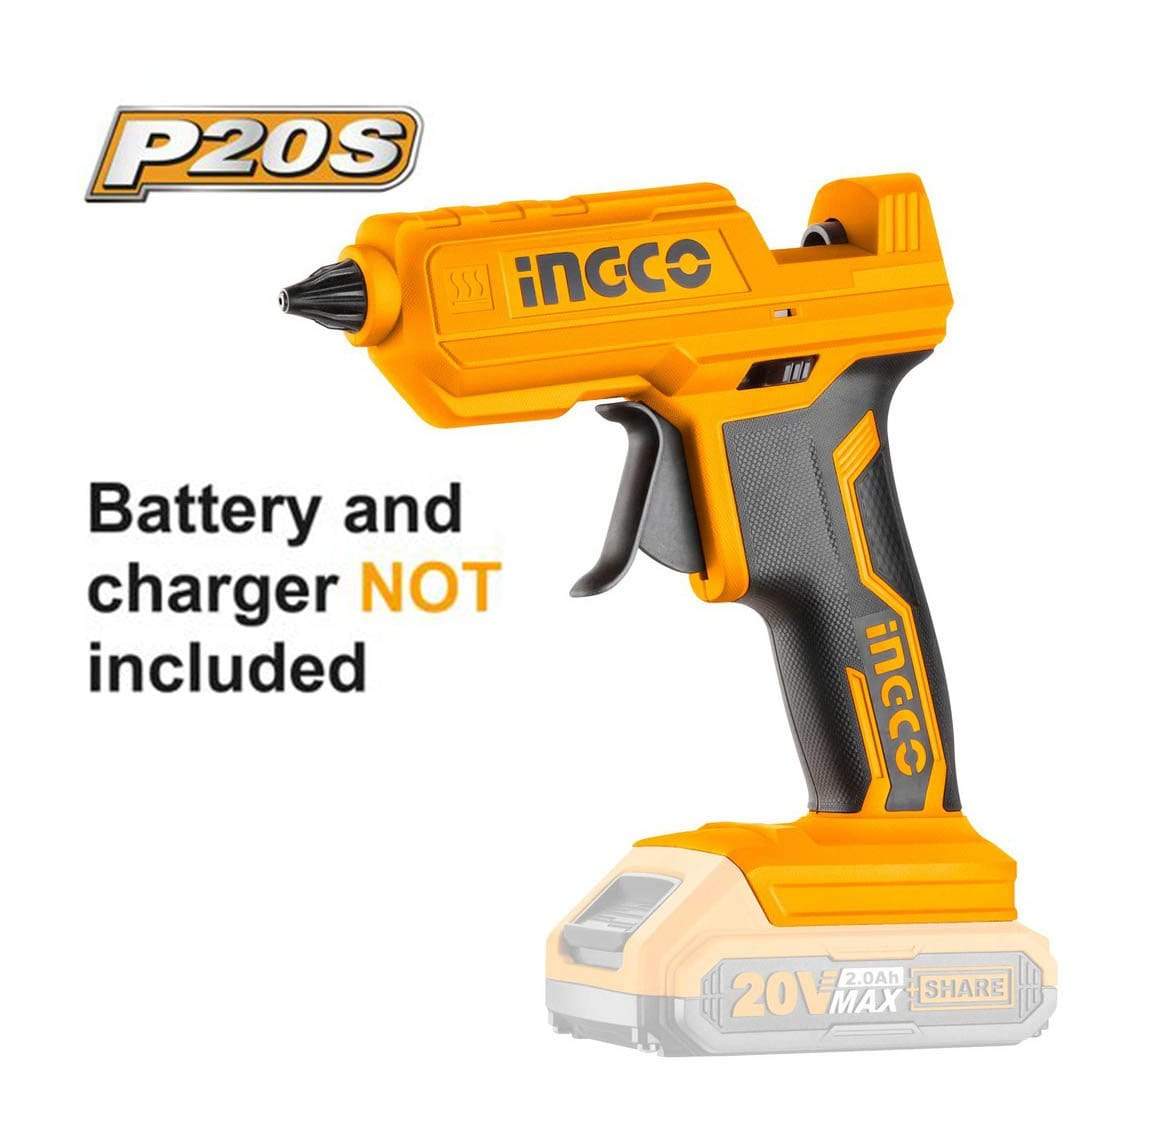 Ingco Lithium-Ion Glue Gun 20V - CGGLI2001 | Supply Master | Accra, Ghana Tools Without Battery & Charger Building Steel Engineering Hardware tool